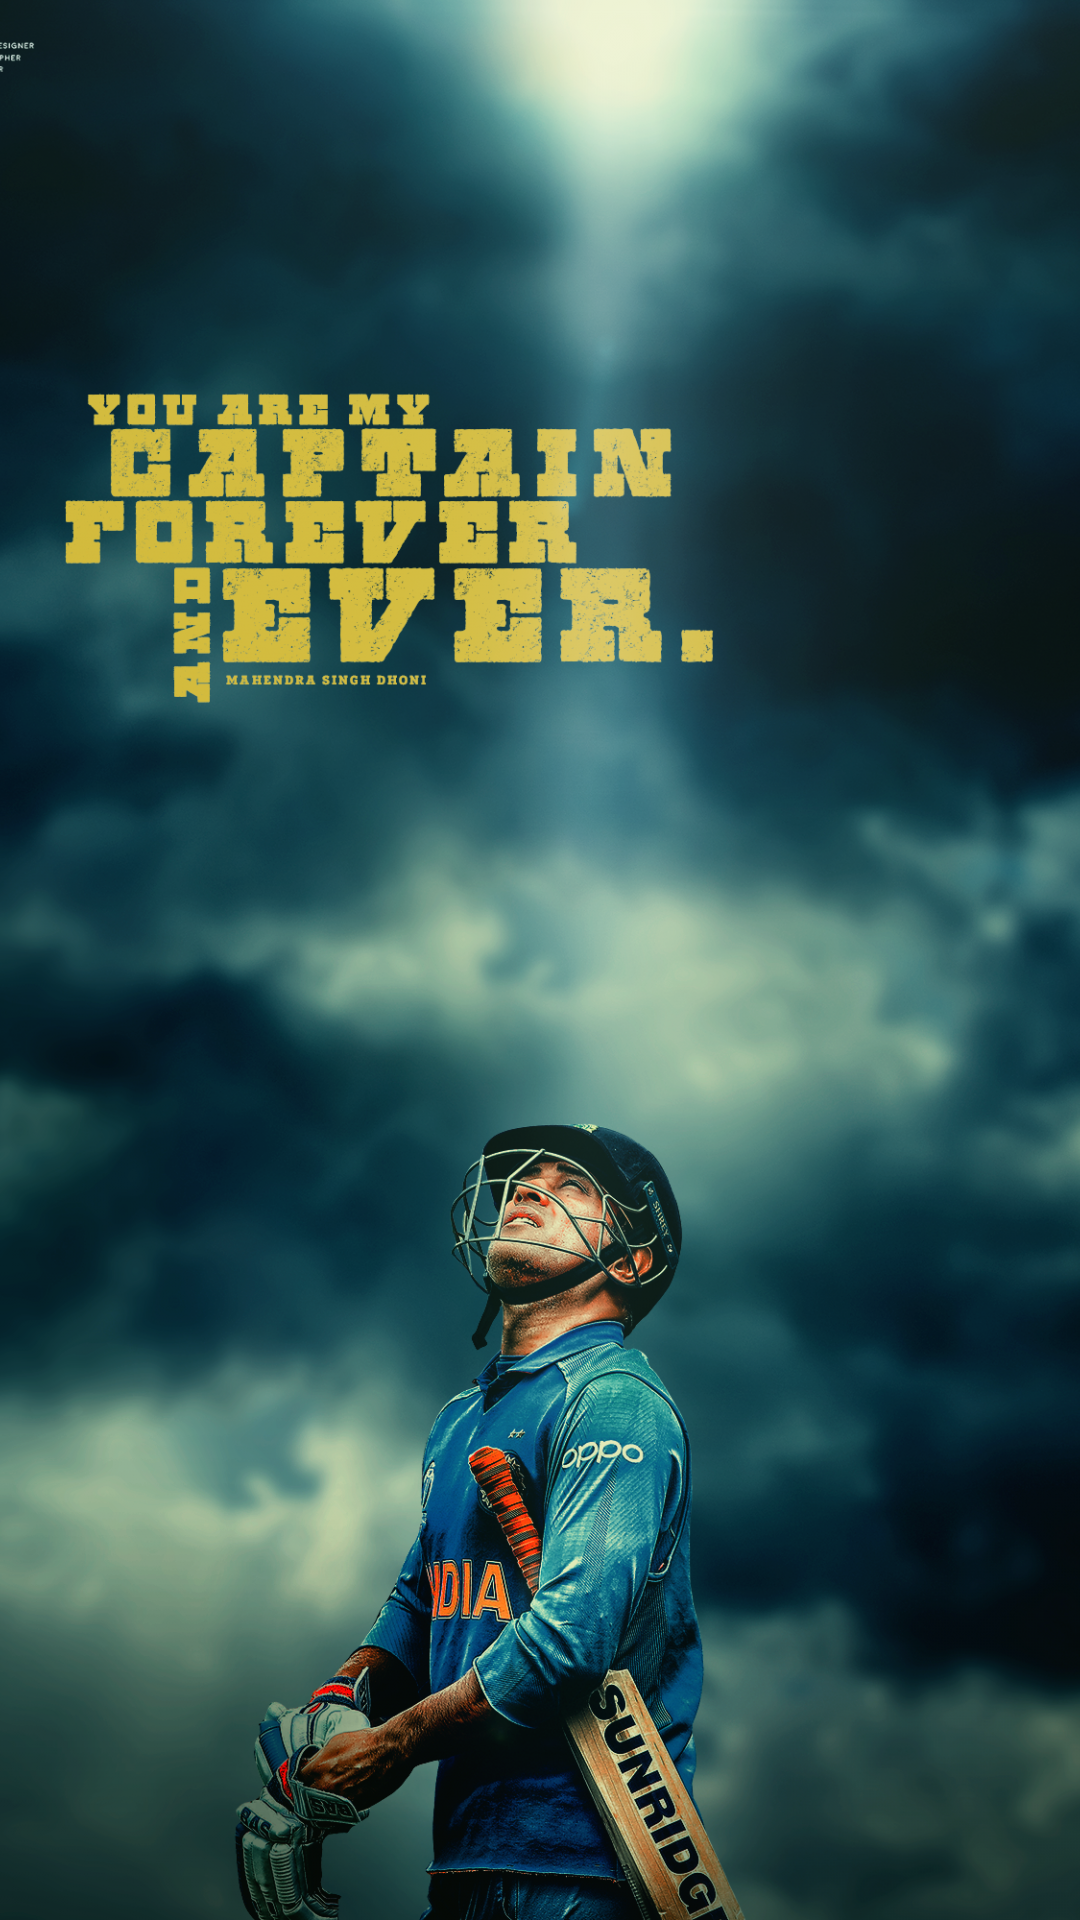 Free download INDIA Cricket wallpaper Ms dhoni [1500x2000] for your Desktop, Mobile & Tablet. Explore Dhoni Army Wallpaper. Dhoni Army Wallpaper, CSK Dhoni Wallpaper, Army Background